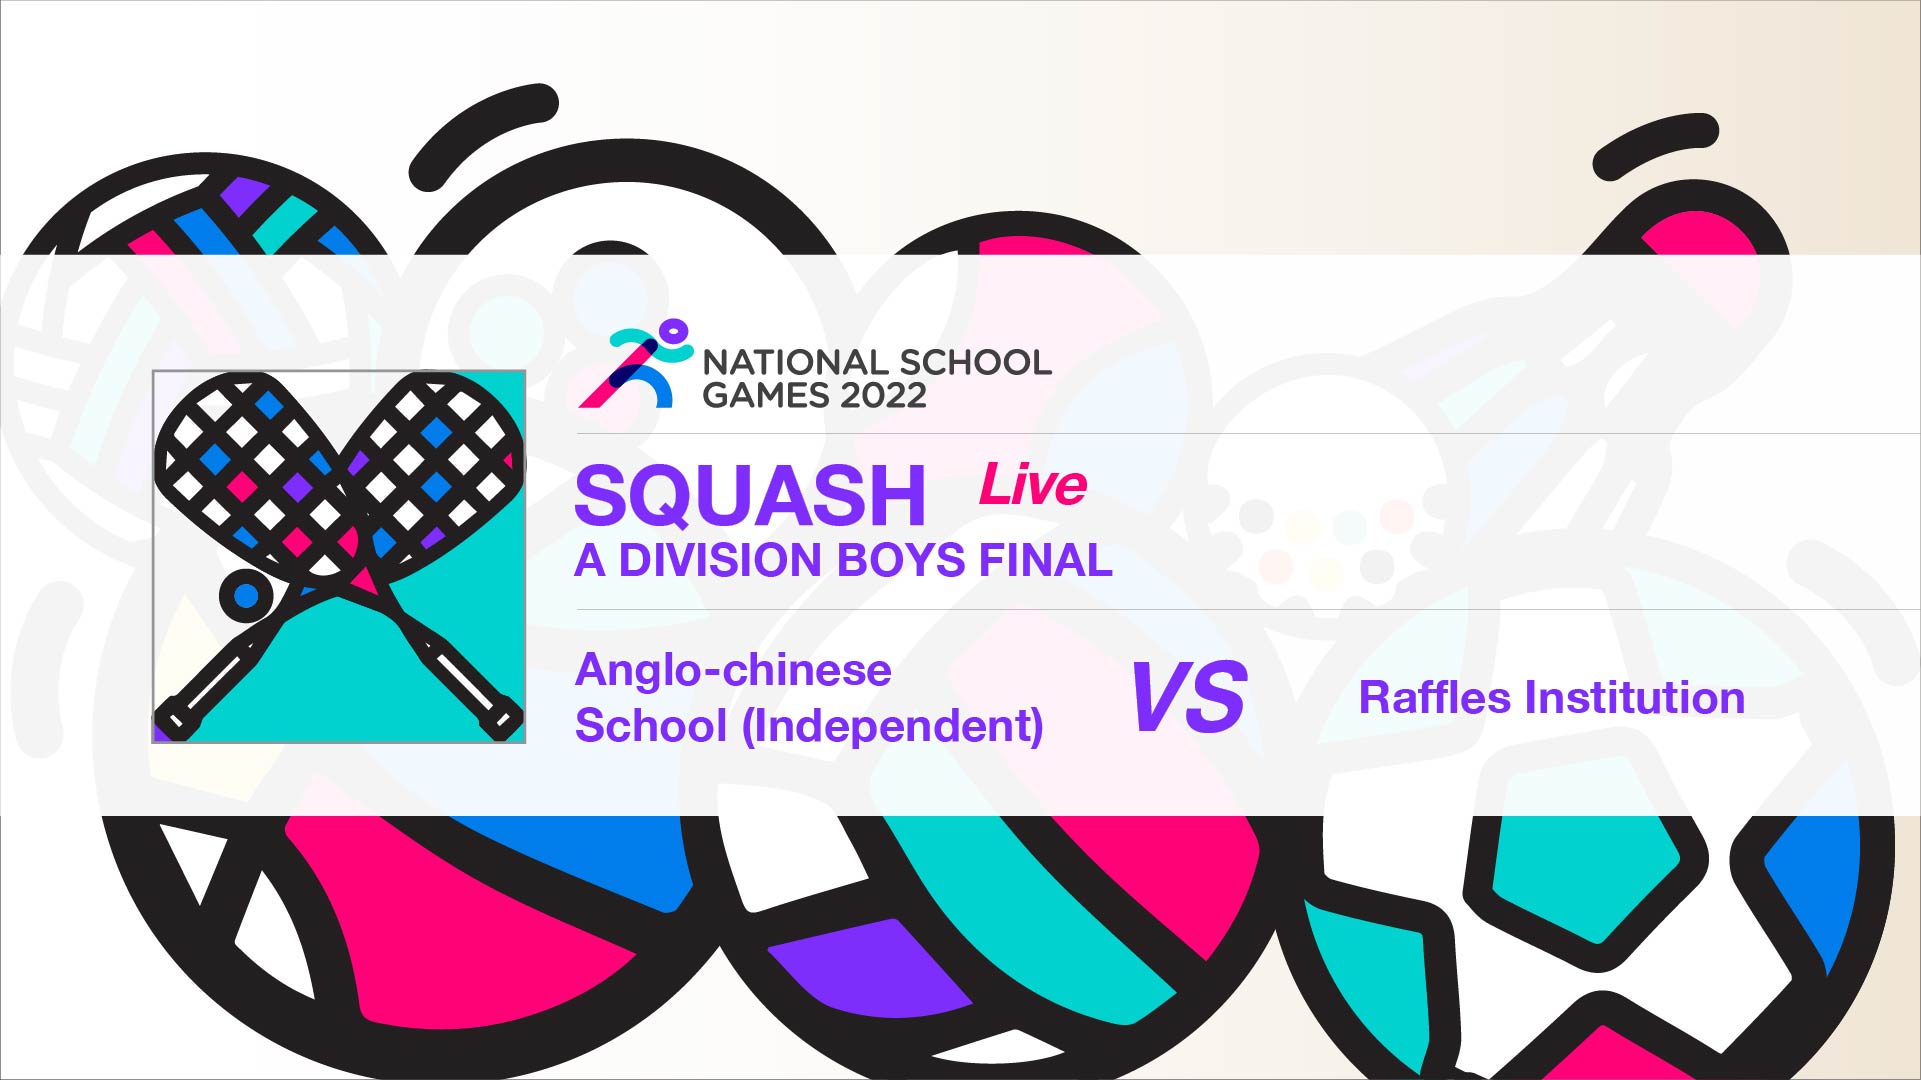 SSSC Squash A Division Boys Final | Anglo-Chinese School (Independent) vs Raffles Institution